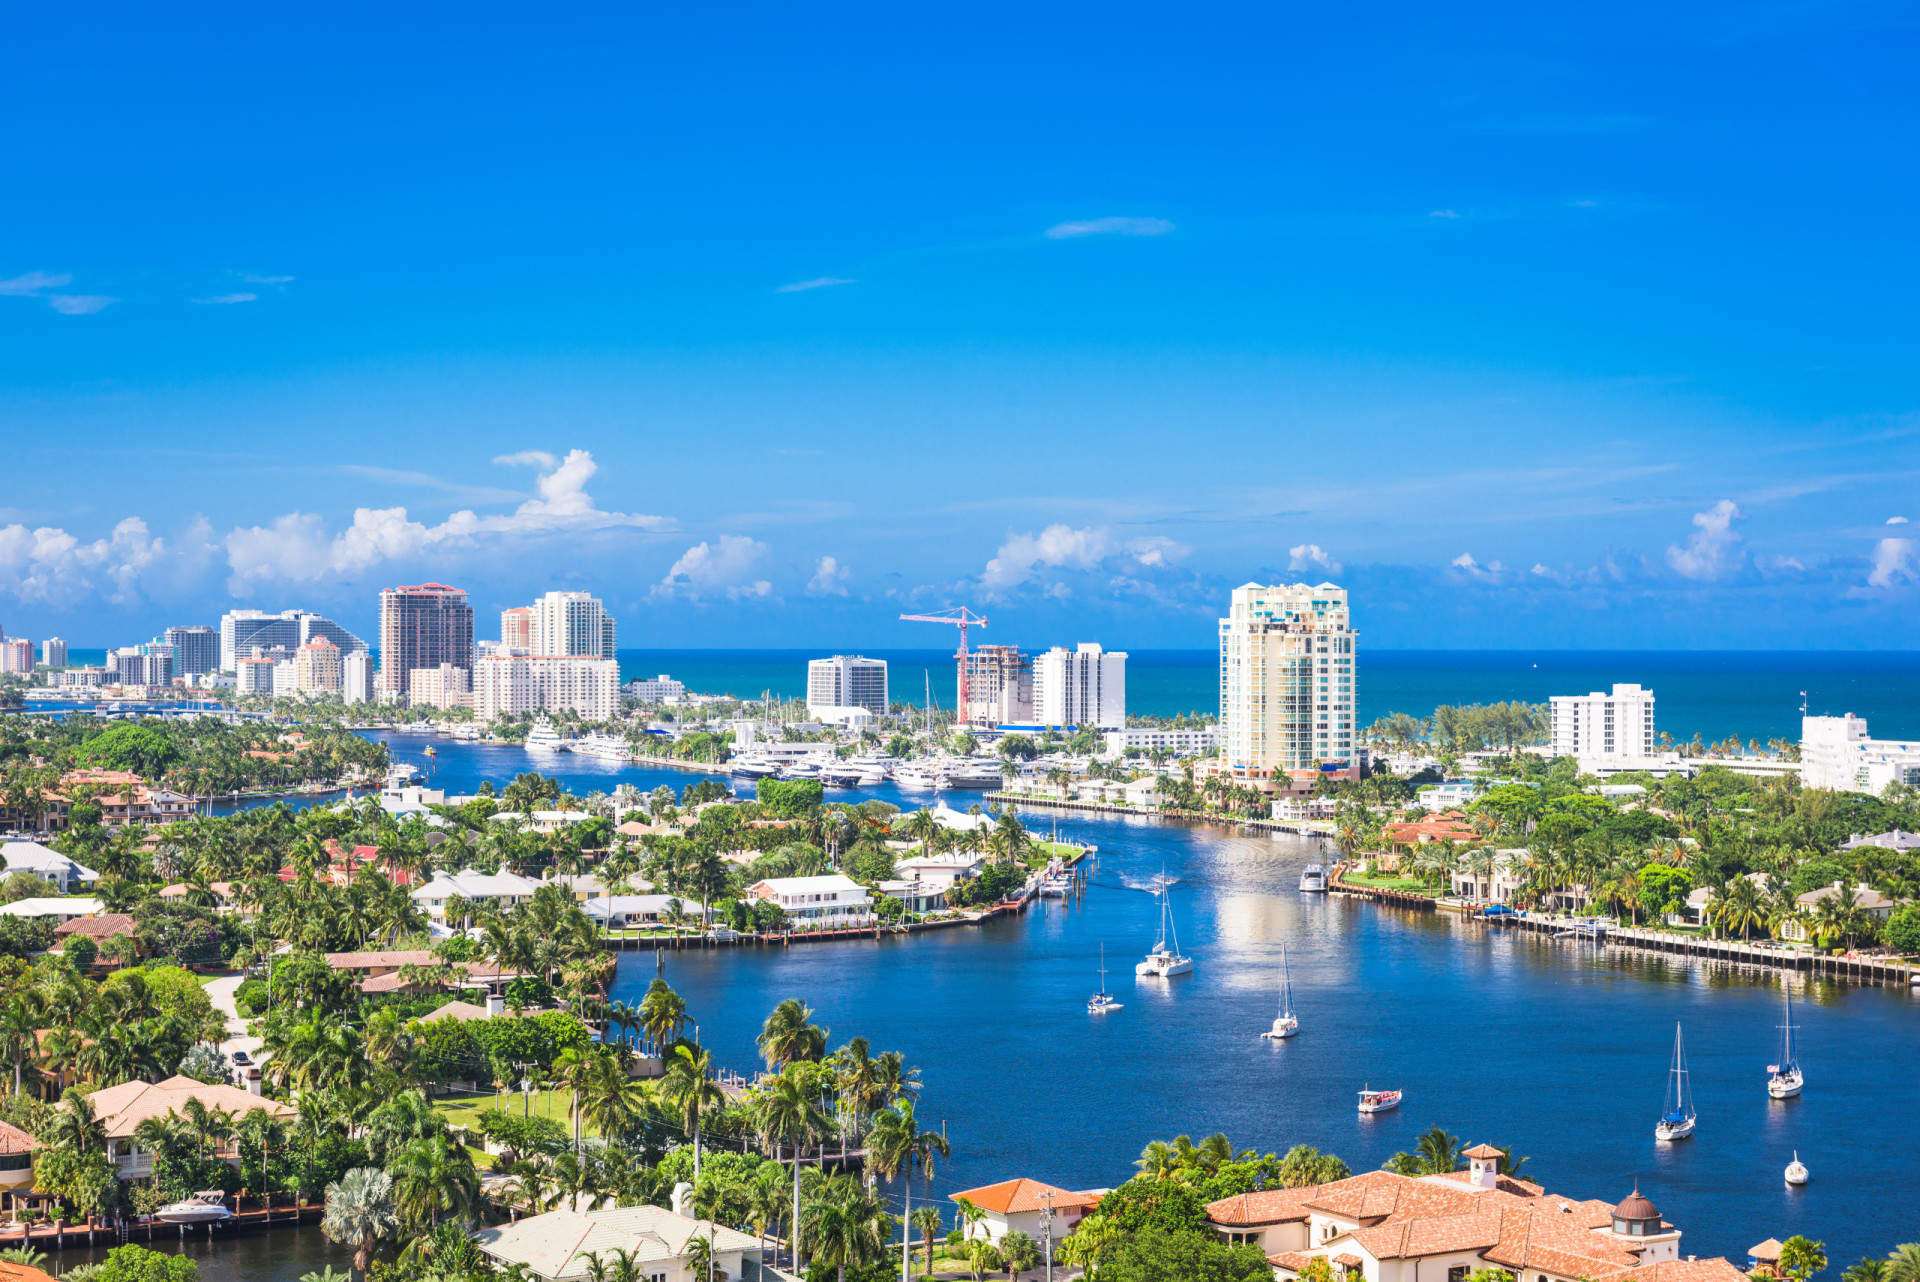 <p>Summer weather in the United States is most intense in Florida, so it’s no wonder that the coastal city of Fort Lauderdale appears on this list. This city is aptly known as the "Venice of America" because of its myriad of boating canals that can entice any traveler.</p><p><a href="https://www.msn.com/en-us/community/channel/vid-7xx8mnucu55yw63we9va2gwr7uihbxwc68fxqp25x6tg4ftibpra?cvid=94631541bc0f4f89bfd59158d696ad7e">Follow us and access great exclusive content every day</a></p>